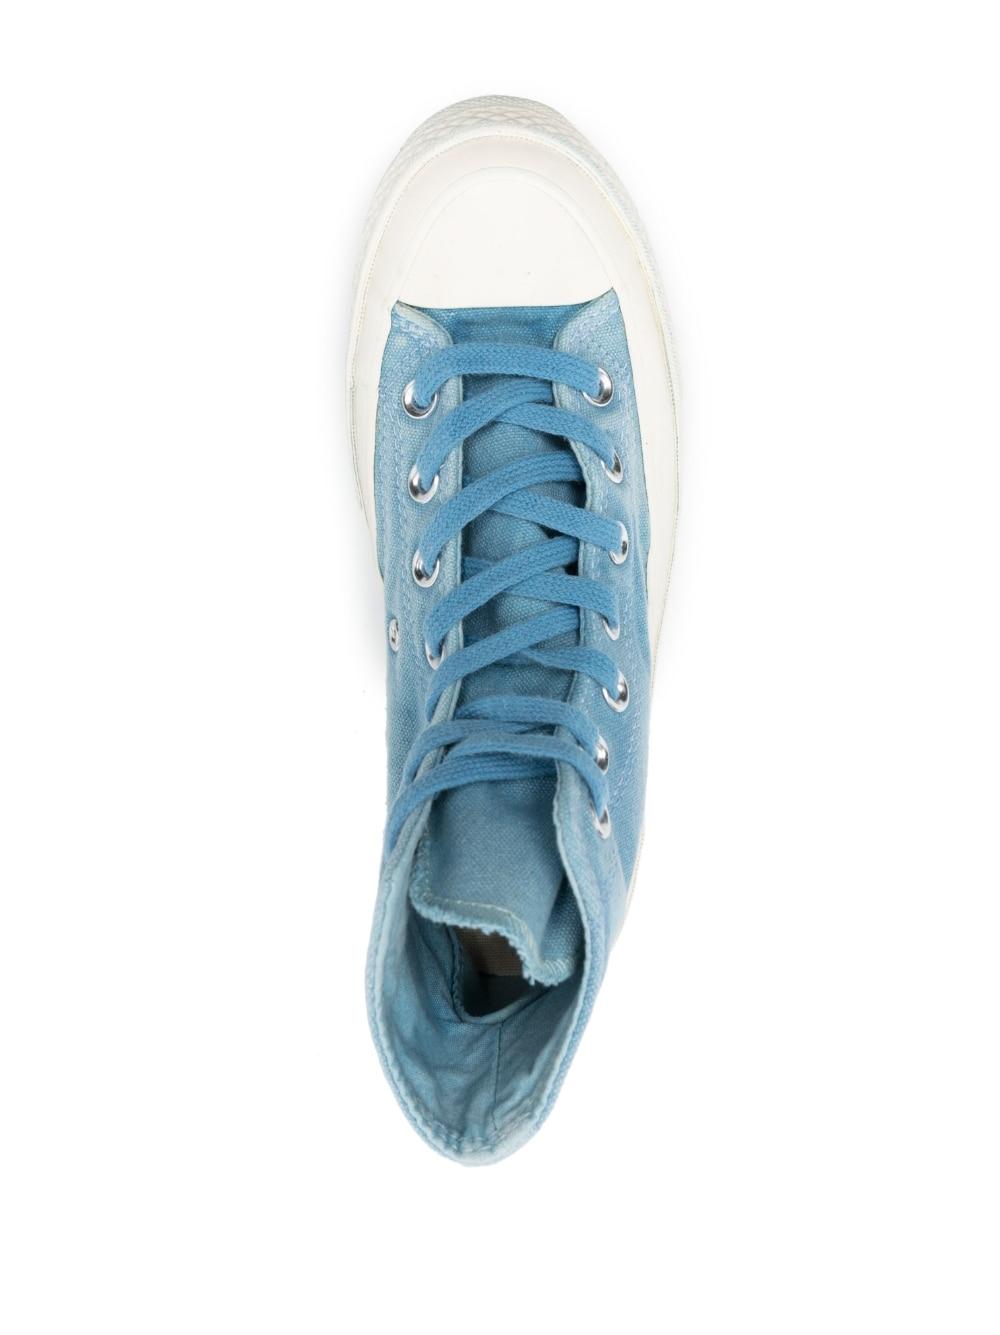 Converse Logo-patch High-top Sneakers in Blue | Lyst Canada